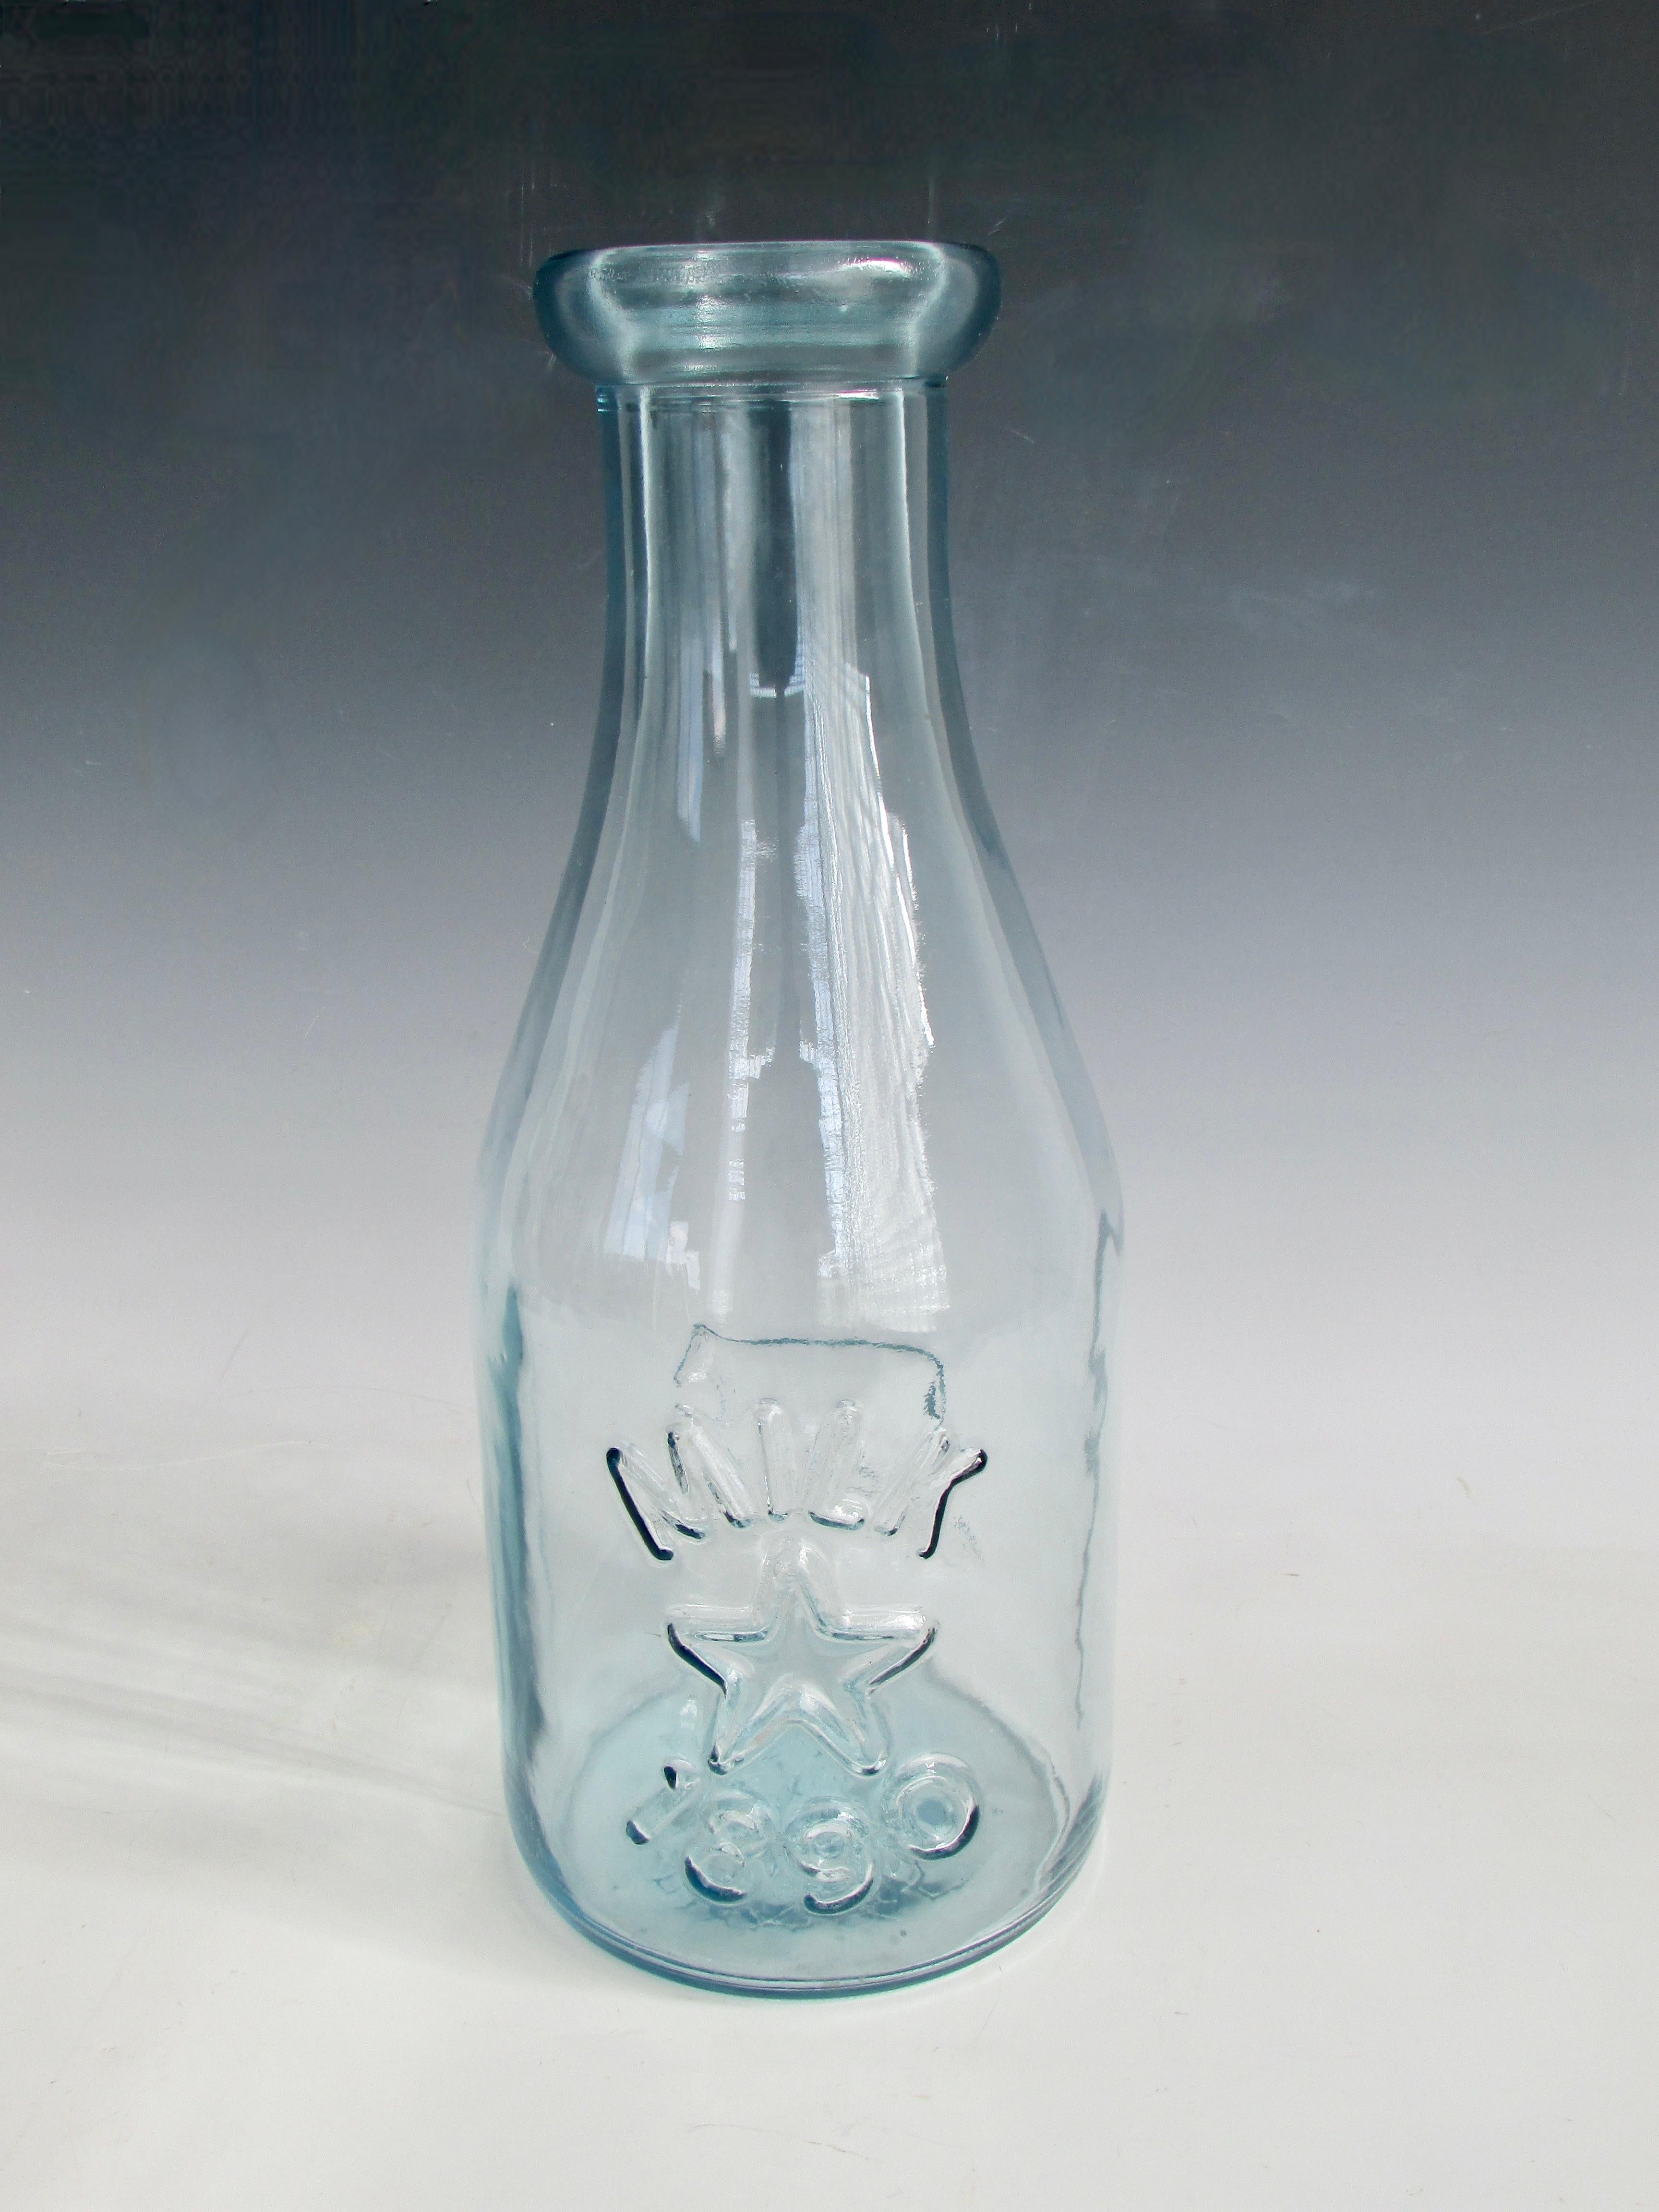 Giant milk bottle in blue tone glass . Blown in a mold . Cow image on one side , star and 1890 on the other side . Large star on underside as well . Most likely from the latter part of the 20th century . Great store display or prop for coffee , ice